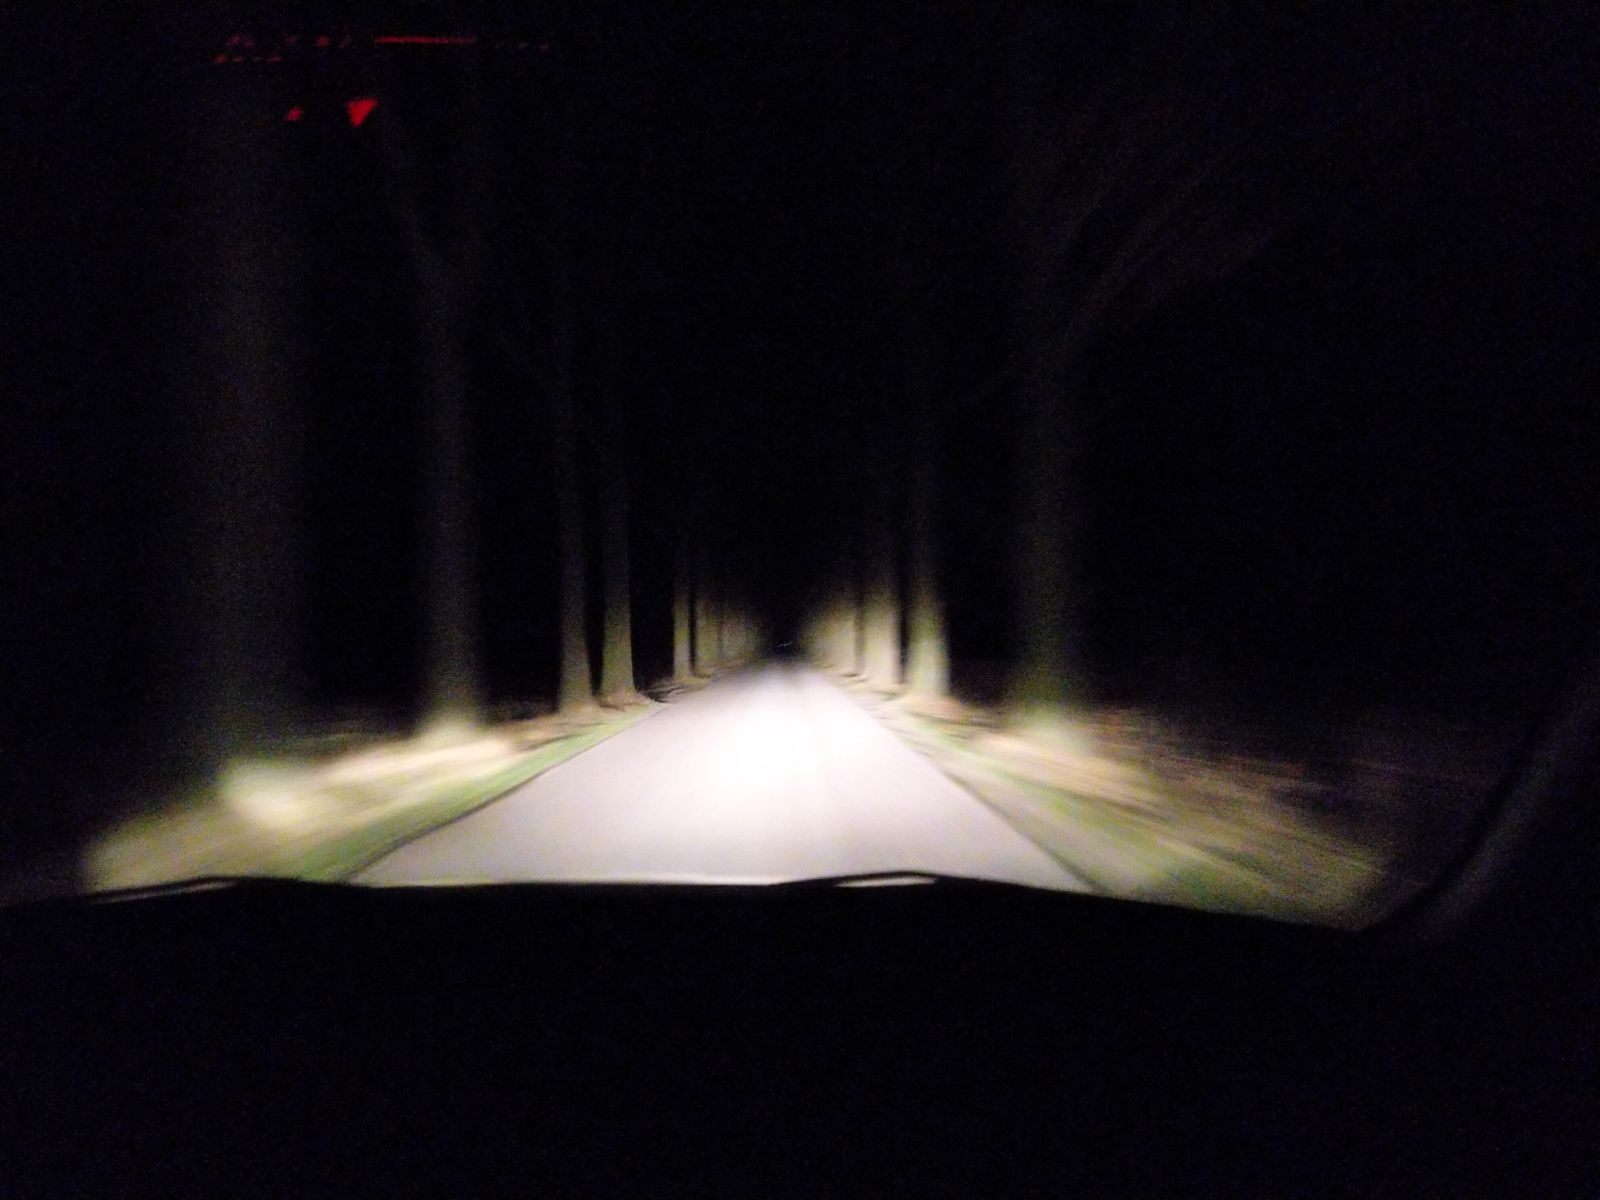 and on our way home again.... this roads lethal when your tired as the trees zooming past are damn near hypnotic